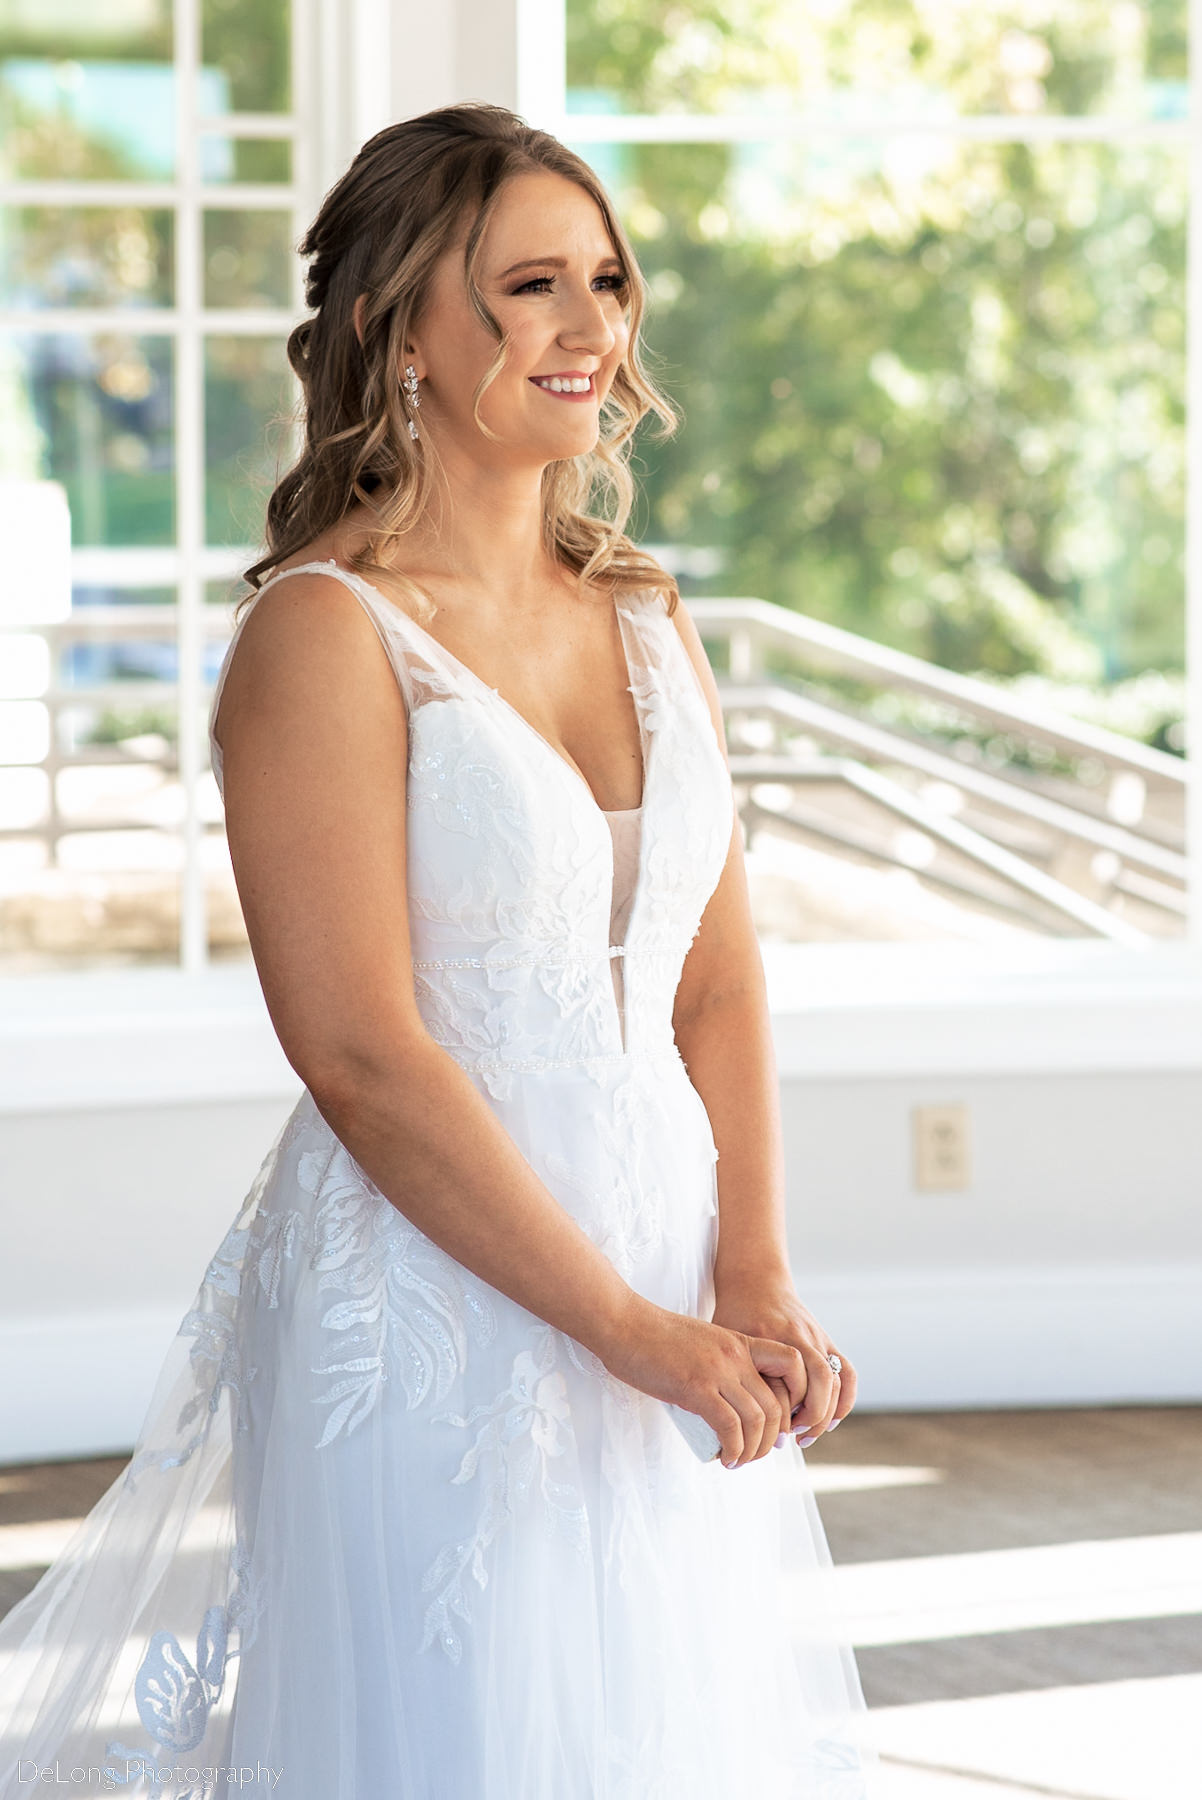 Bride smiling as she approaches her groom before their first look at Pine Island Country Club in Charlotte, NC by Charlotte wedding Photographers DeLong Photography